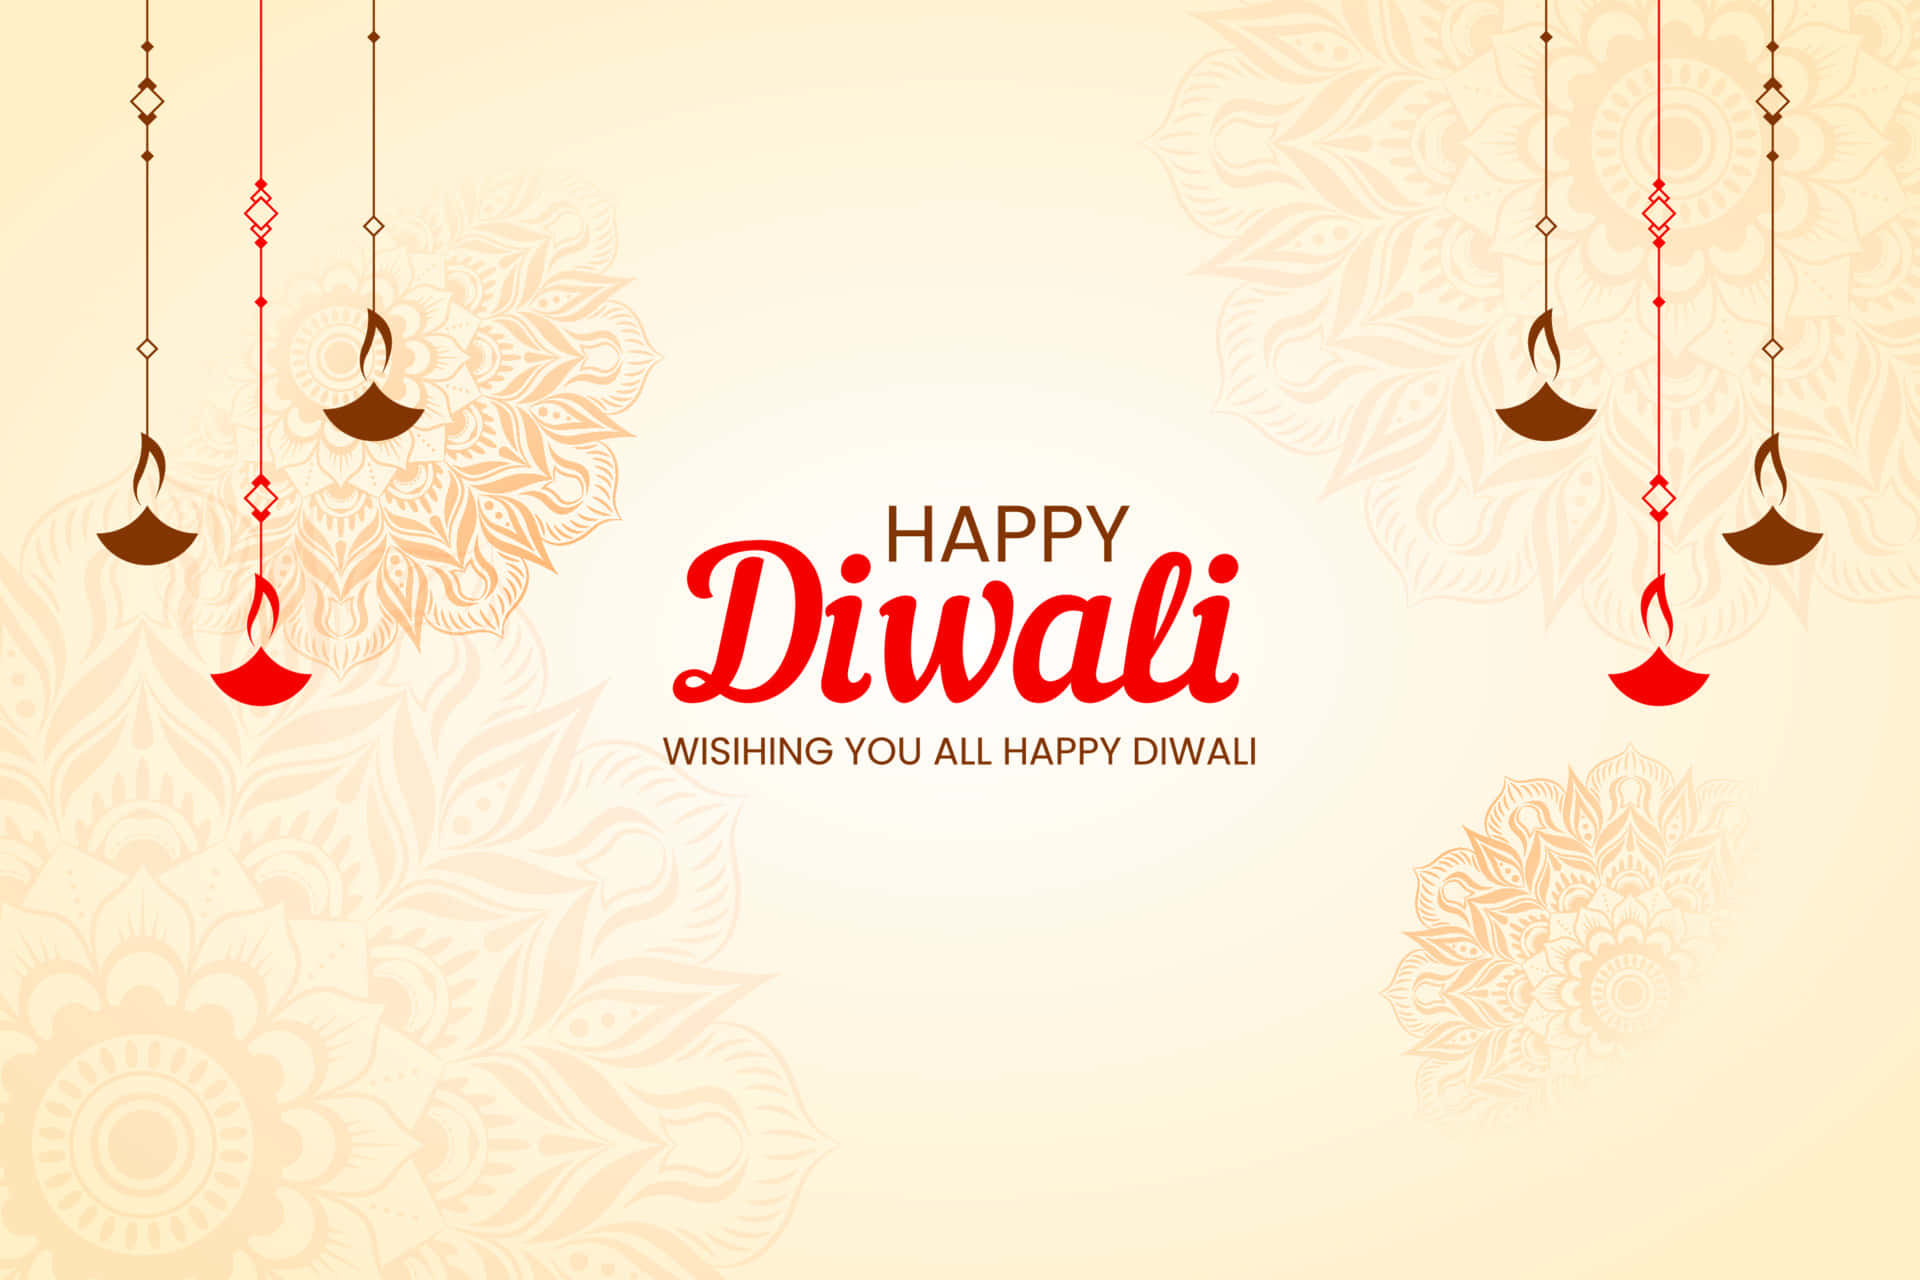 Happy Diwali Greeting Card With A Lotus Flower